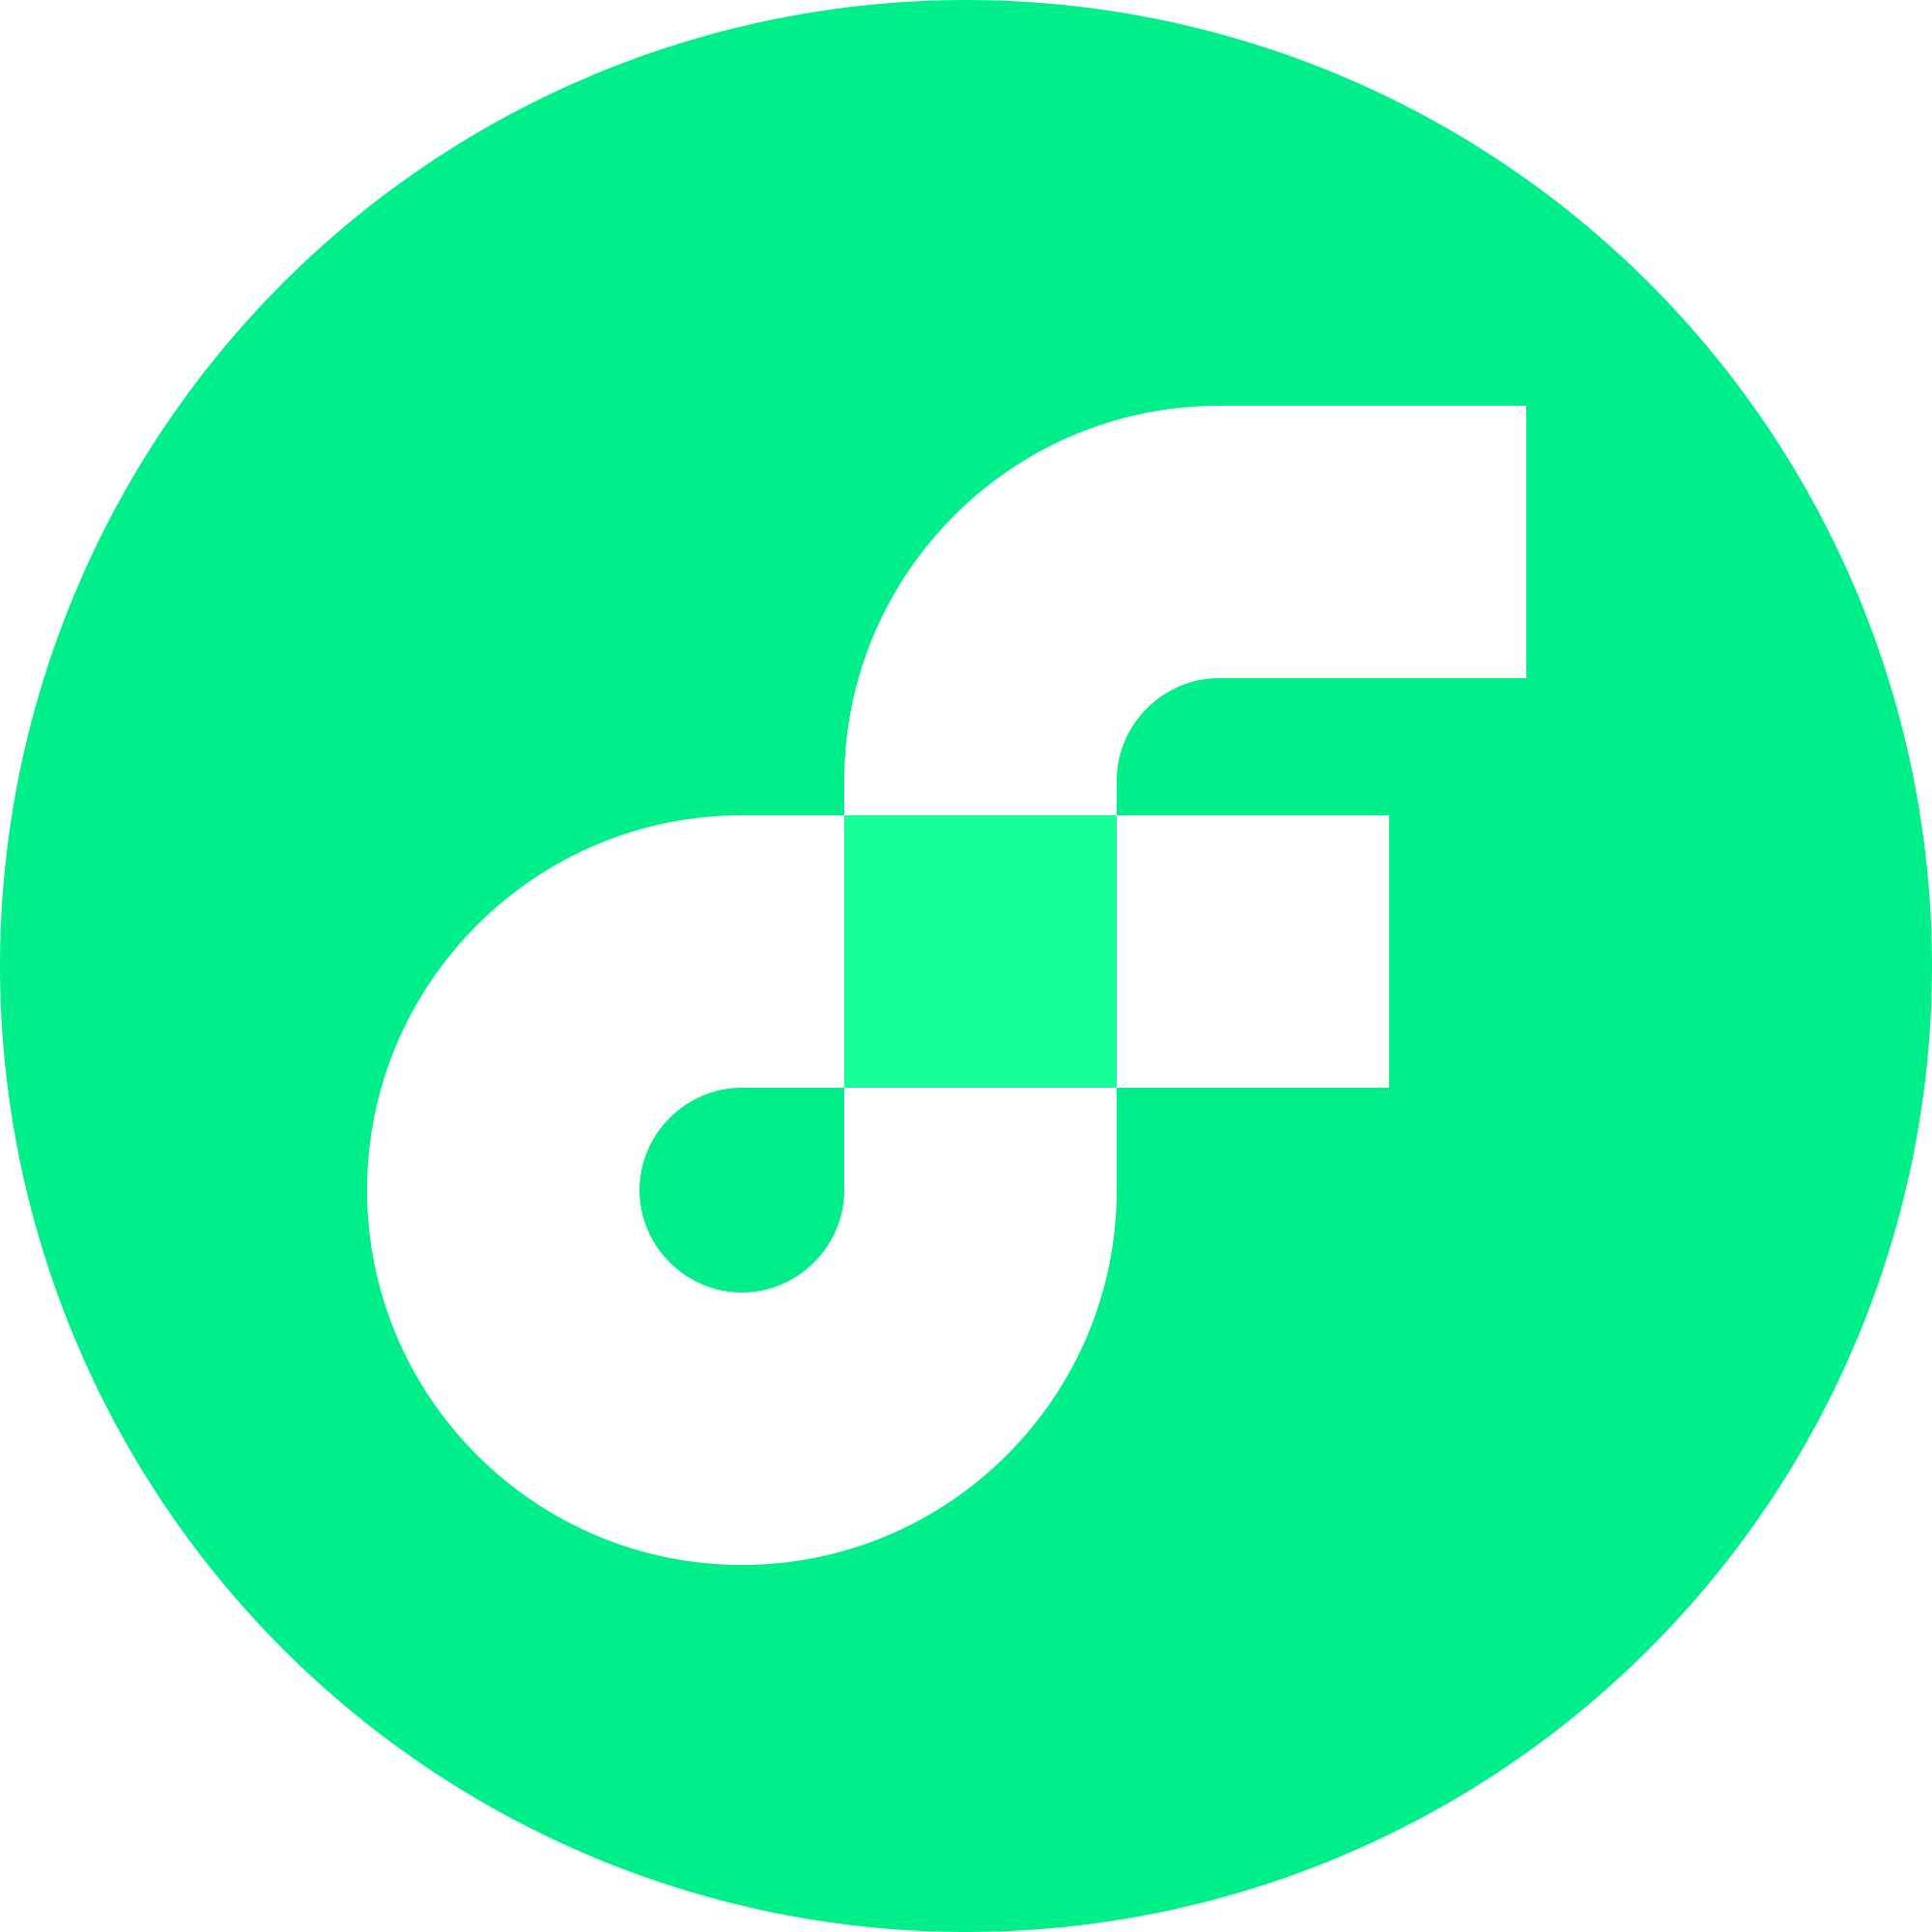 Flow logo mint green circle with lowercase f morphing into an o on the bottom right